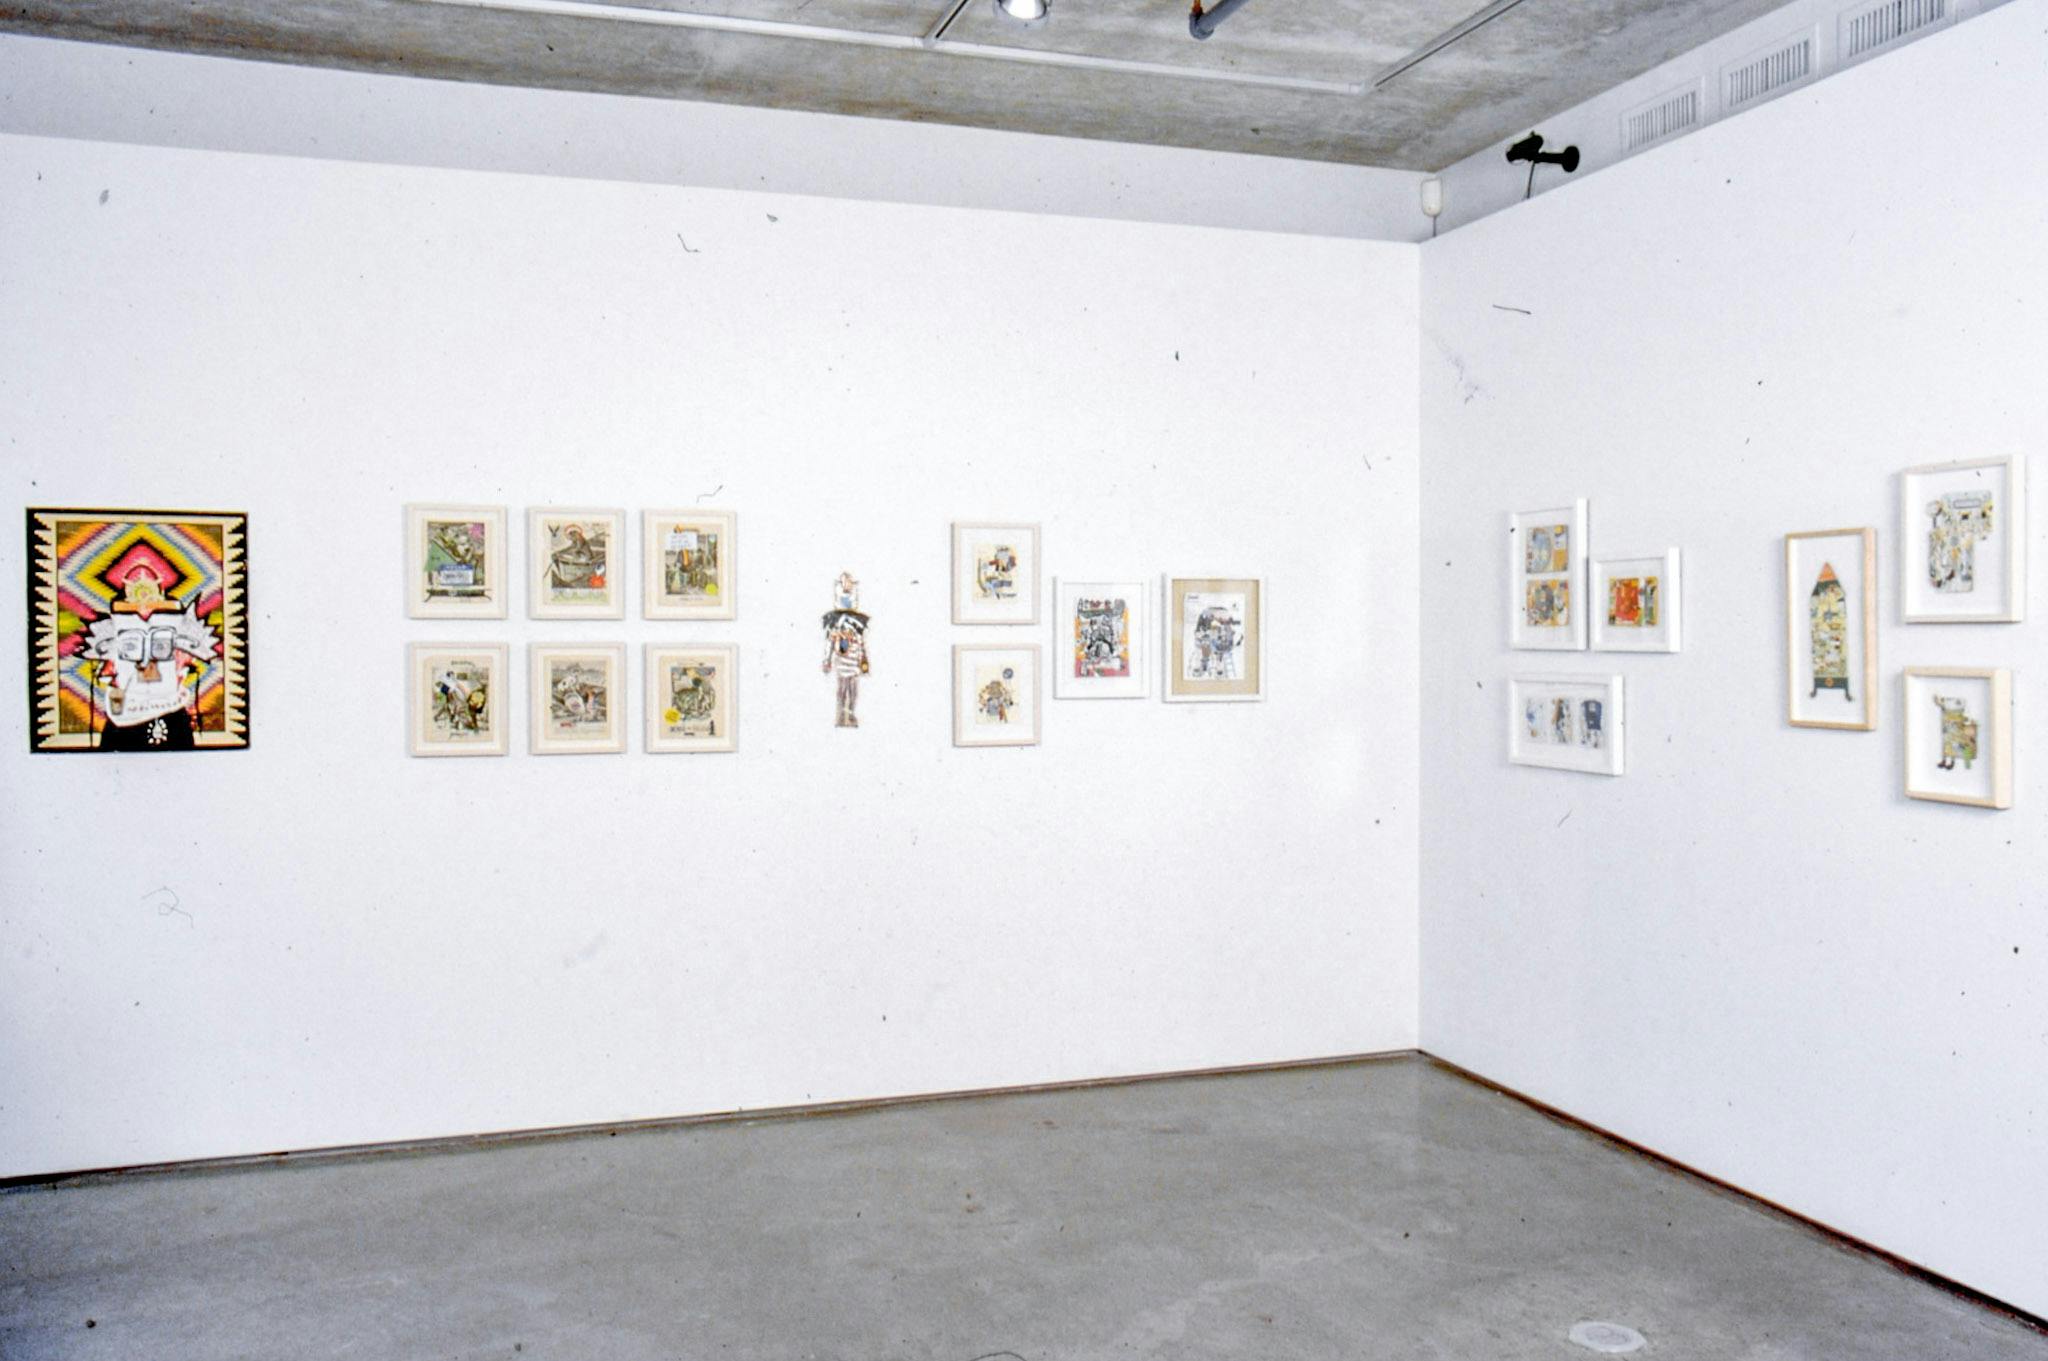 An installation image of a group show titled Bit by Bit. Approximately twenty of two-dimensional works, mostly drawings and collage pieces, are mounted on the gallery walls.